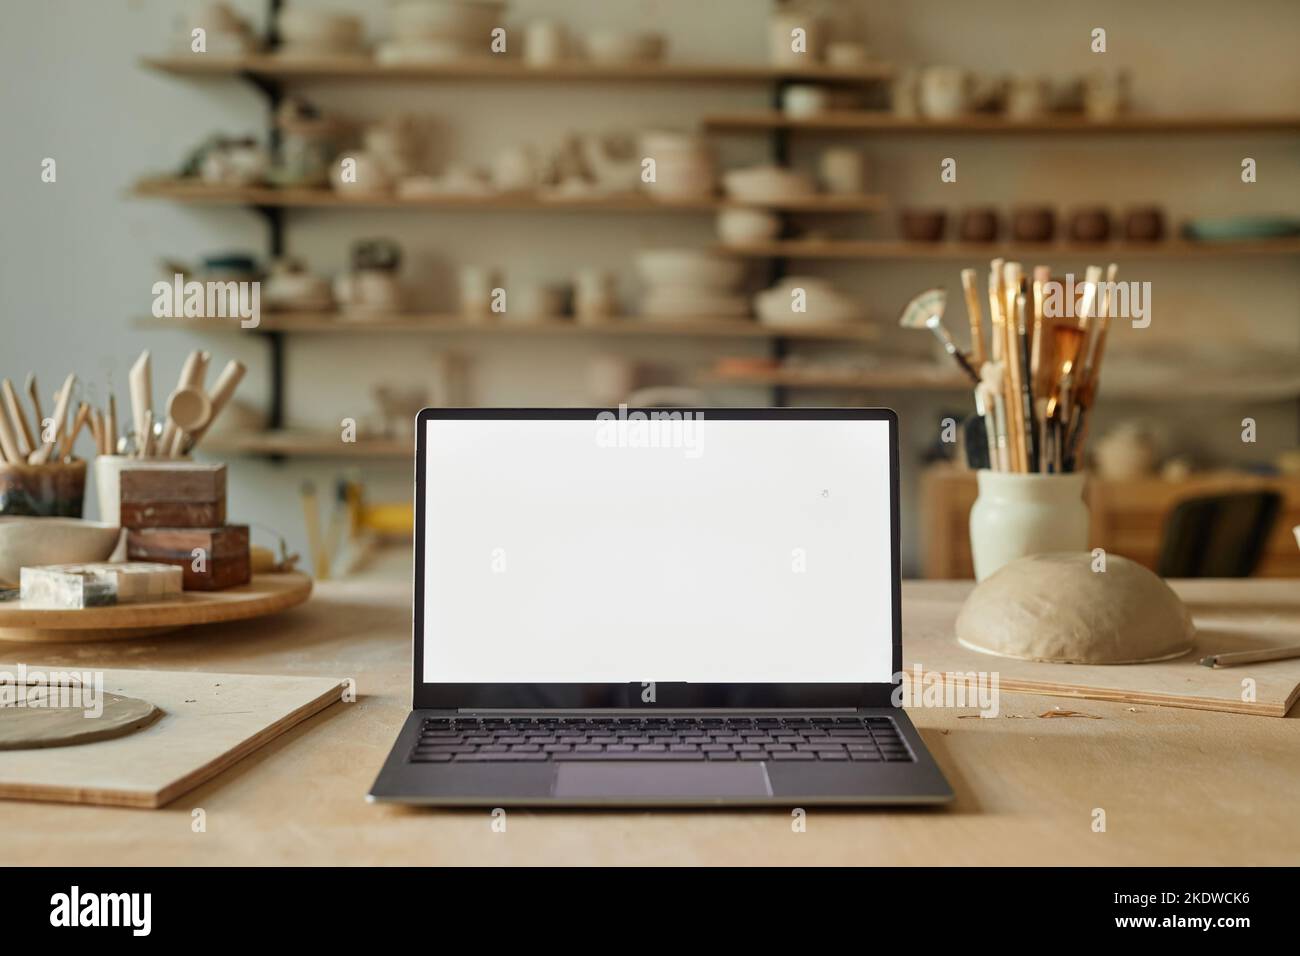 Background image of opened laptop with blank white screen in pottery workshop, copy space Stock Photo